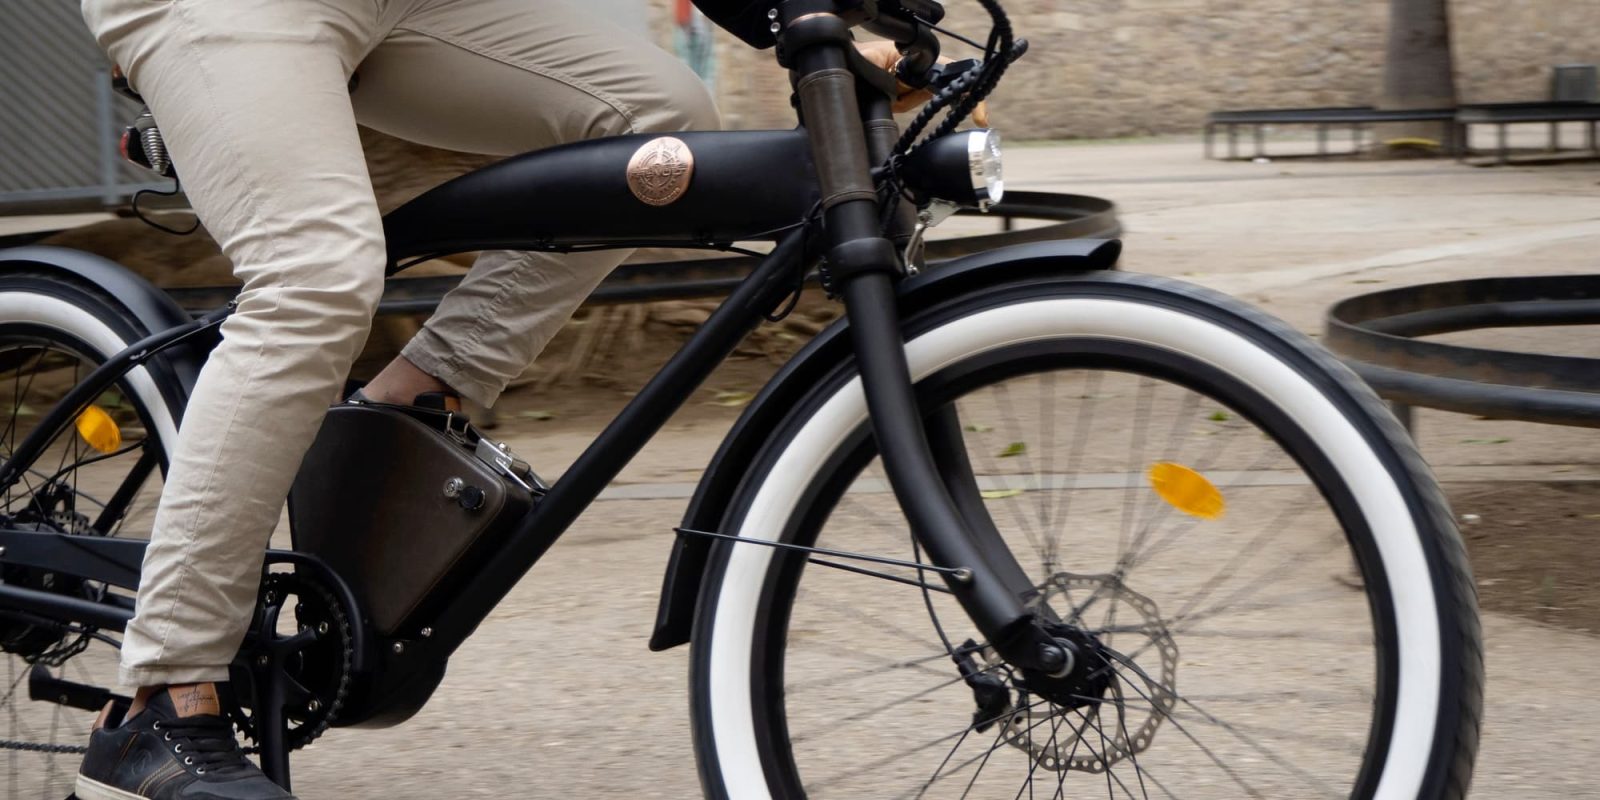 Closer look at Rayvolt’s stunning electric bikes, e-motorcycle and more